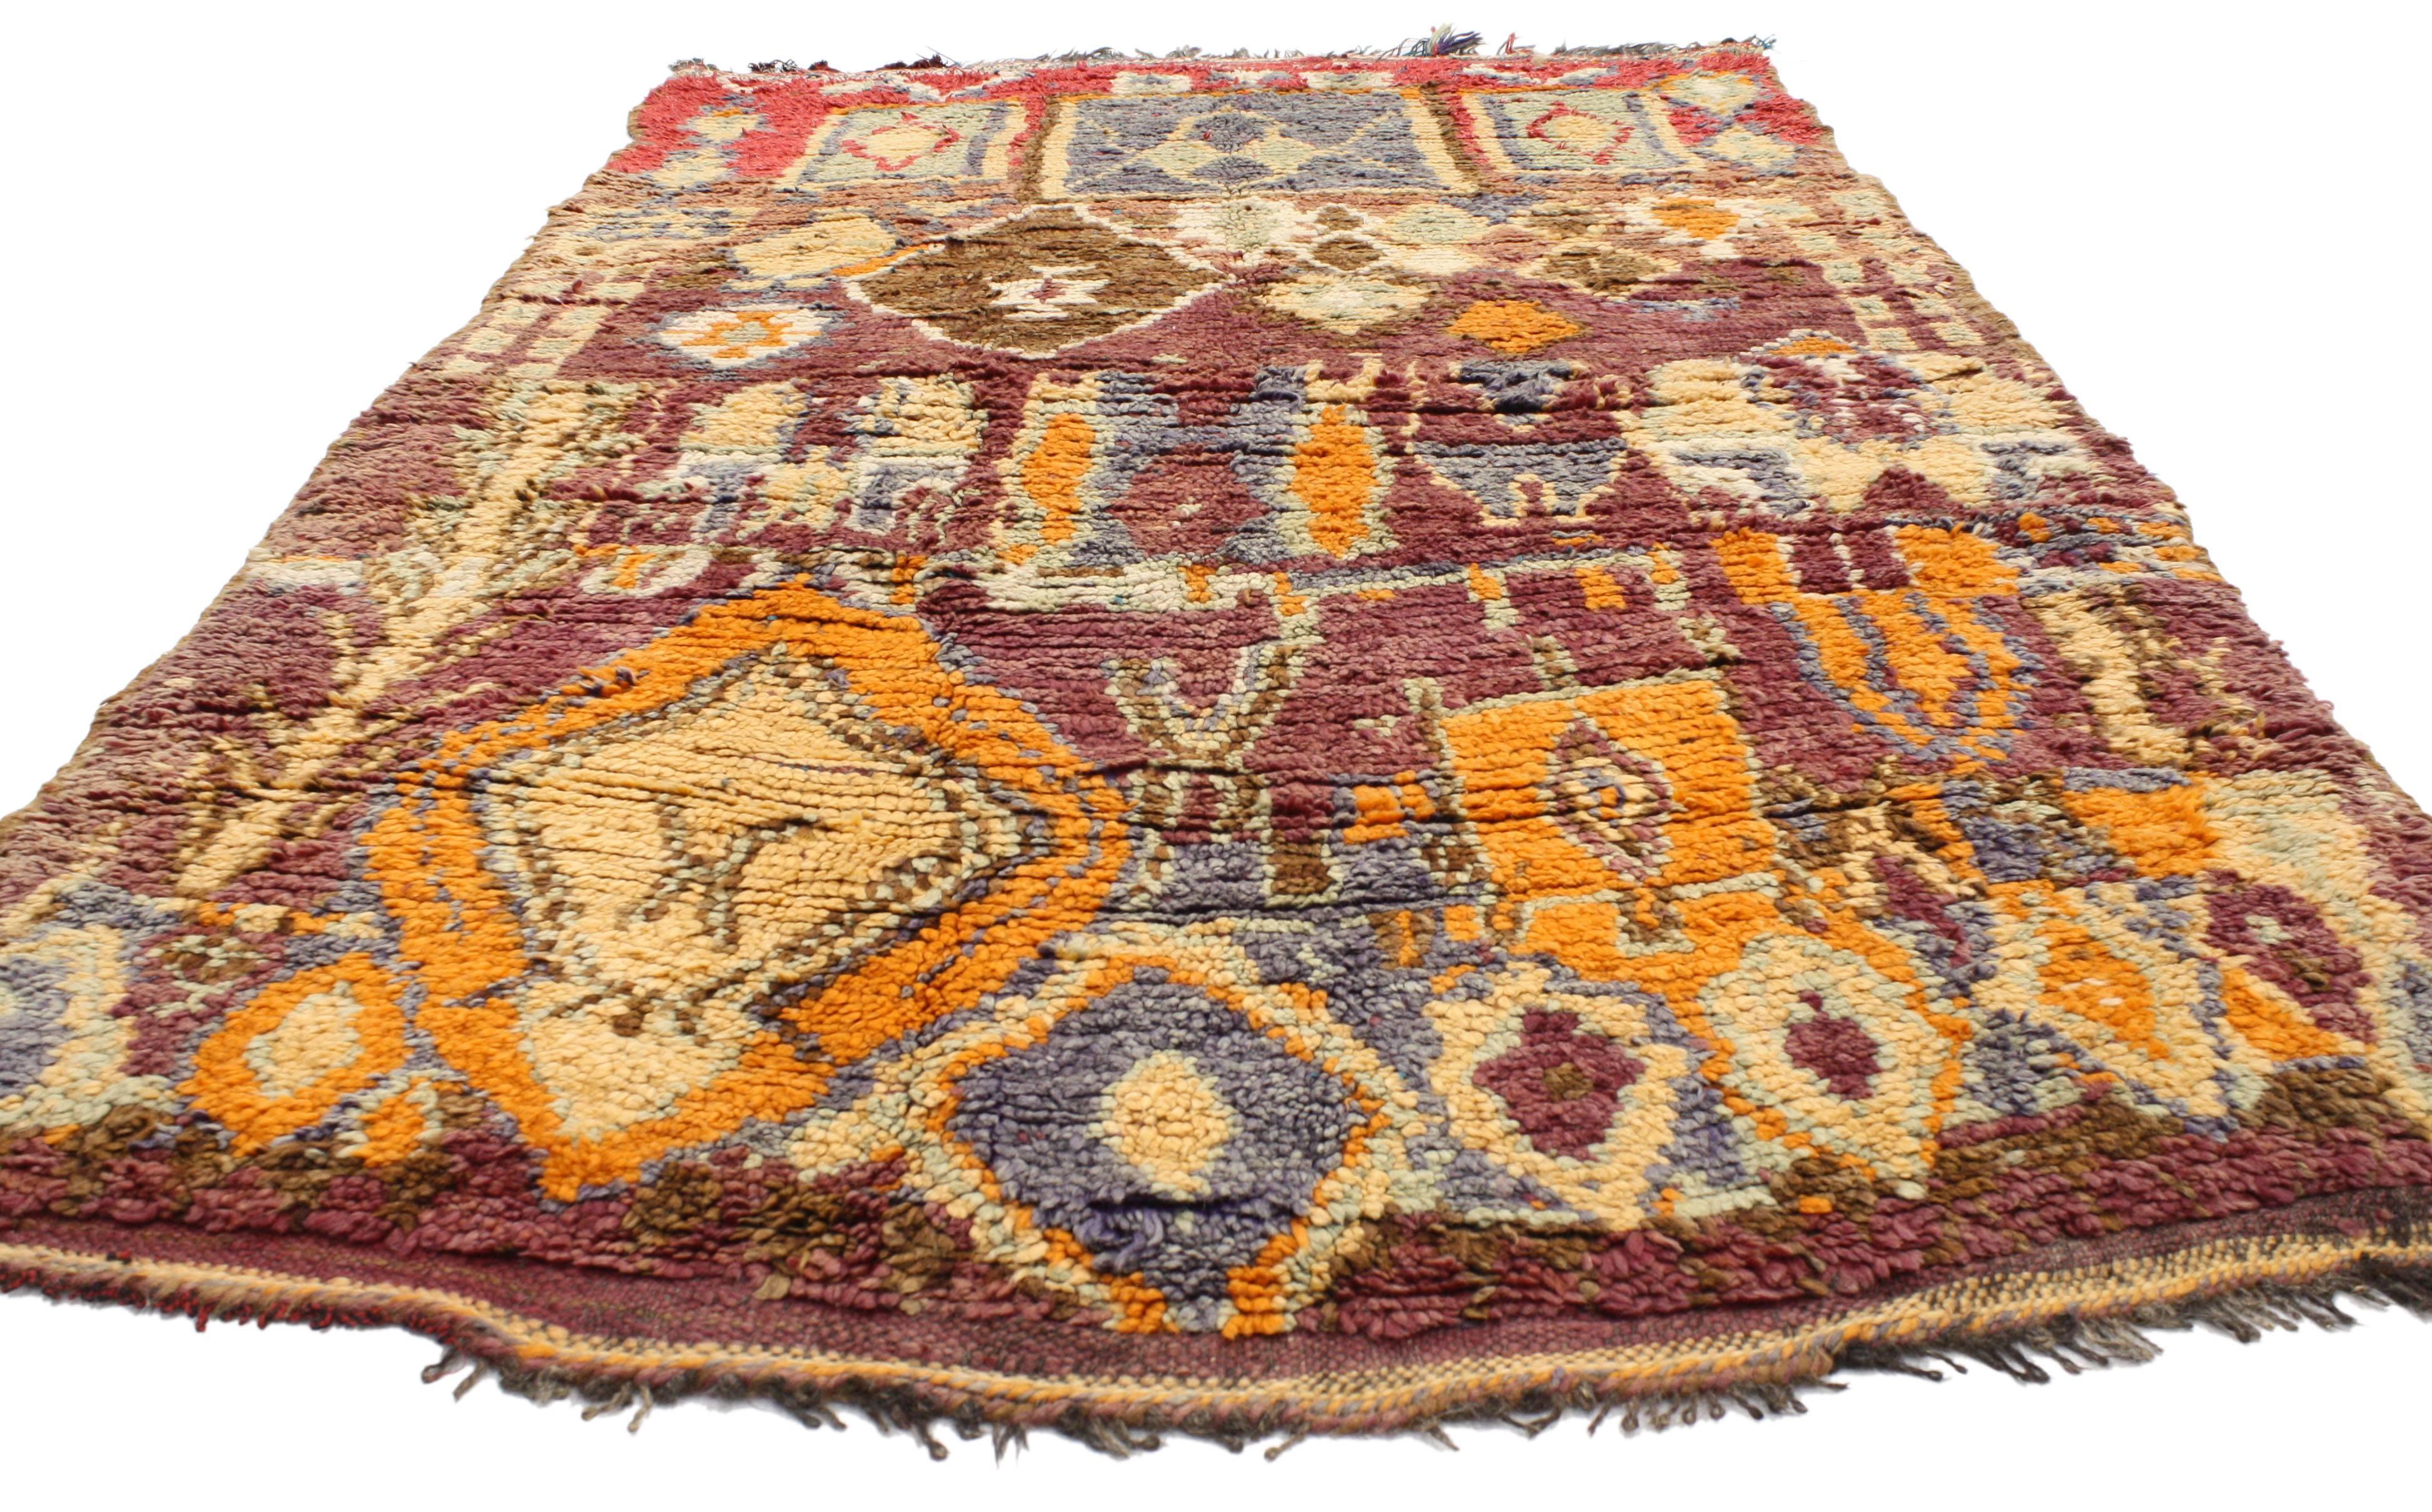 20632 Vintage Berber Moroccan Rug with Modern Tribal Style. Impeccably woven from hand-knotted wool and displaying a modern tribal style, this vintage Berber Moroccan rug features symbolic Berber tribal motifs in an abrashed field. Blending the